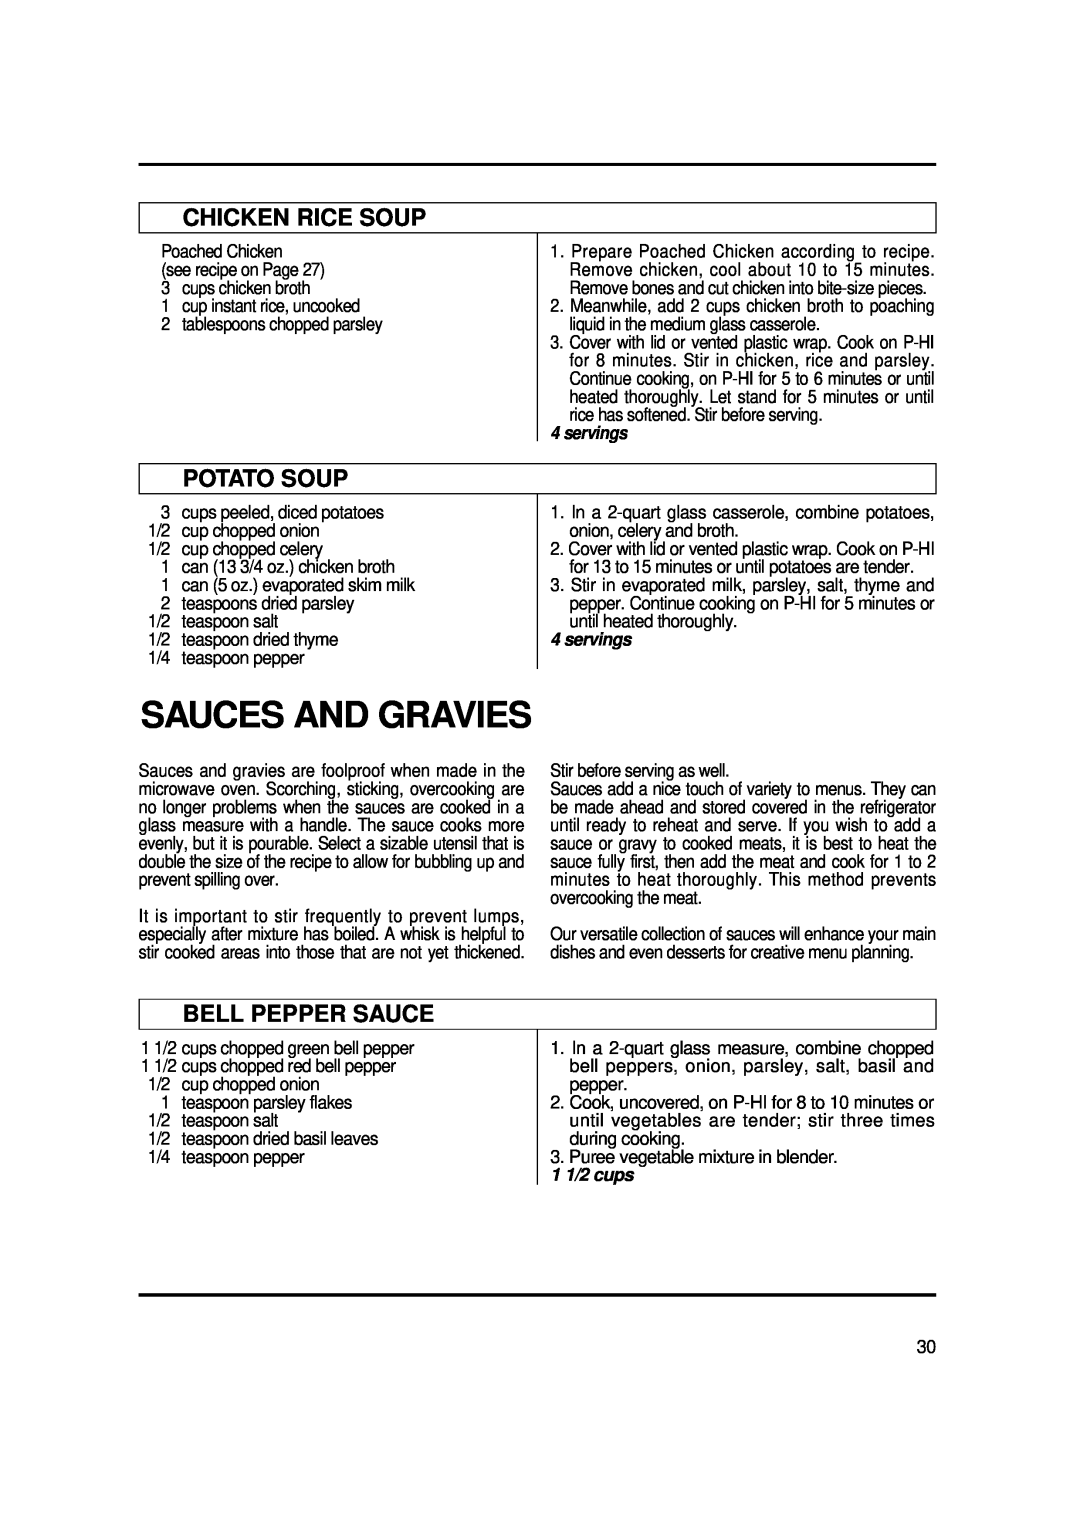 Magic Chef MCO2212ARW manual Sauces And Gravies, Chicken Rice Soup, Potato Soup, Bell Pepper Sauce, 1 1/2 cups, servings 